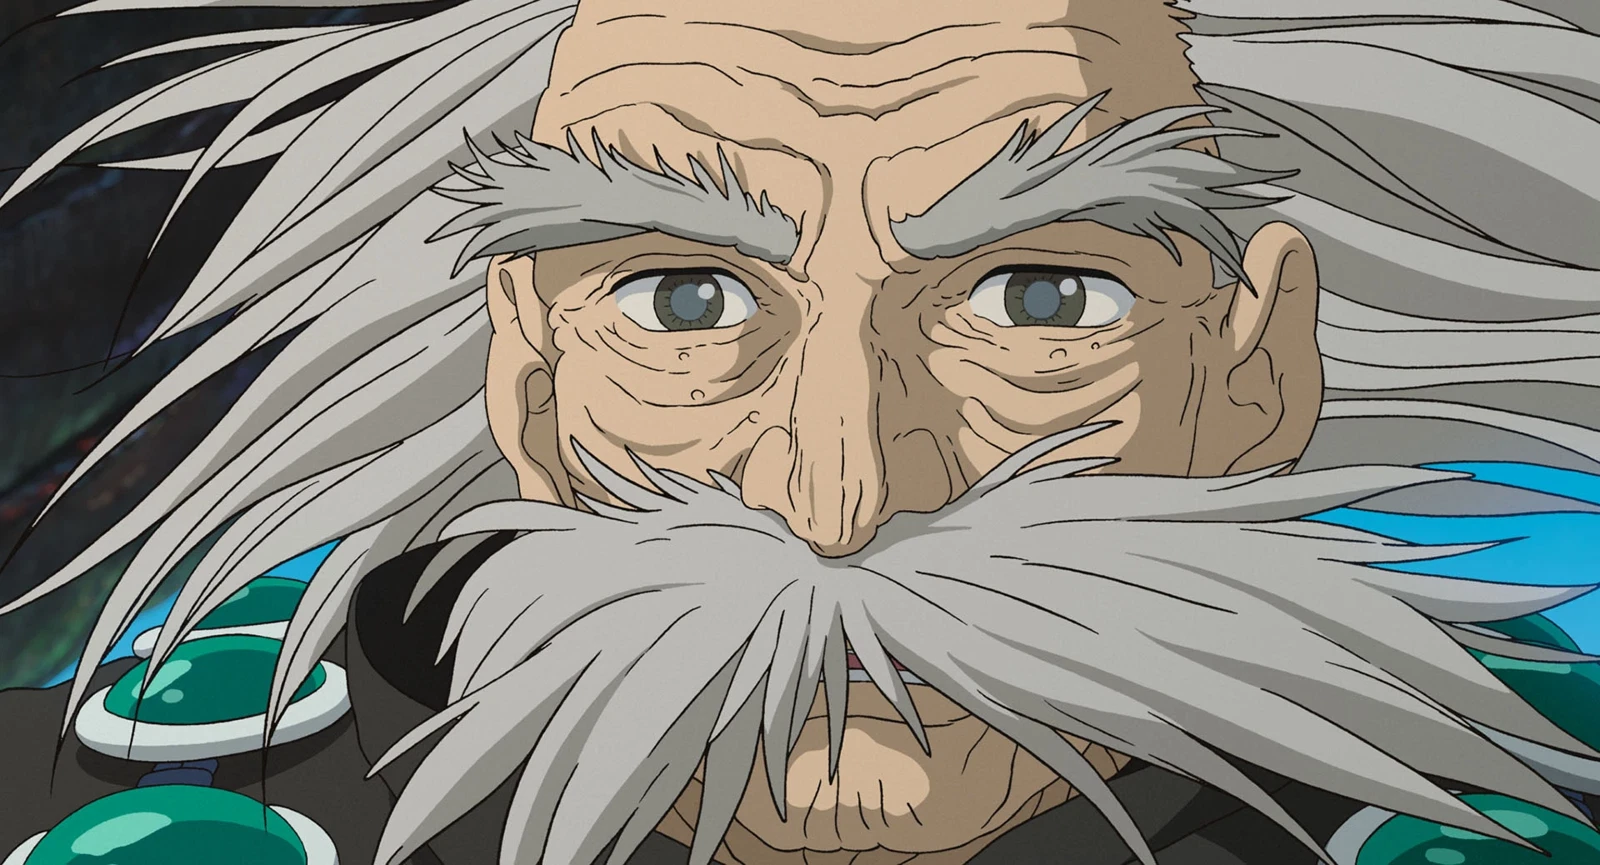 The Granduncle in The Boy and the Heron